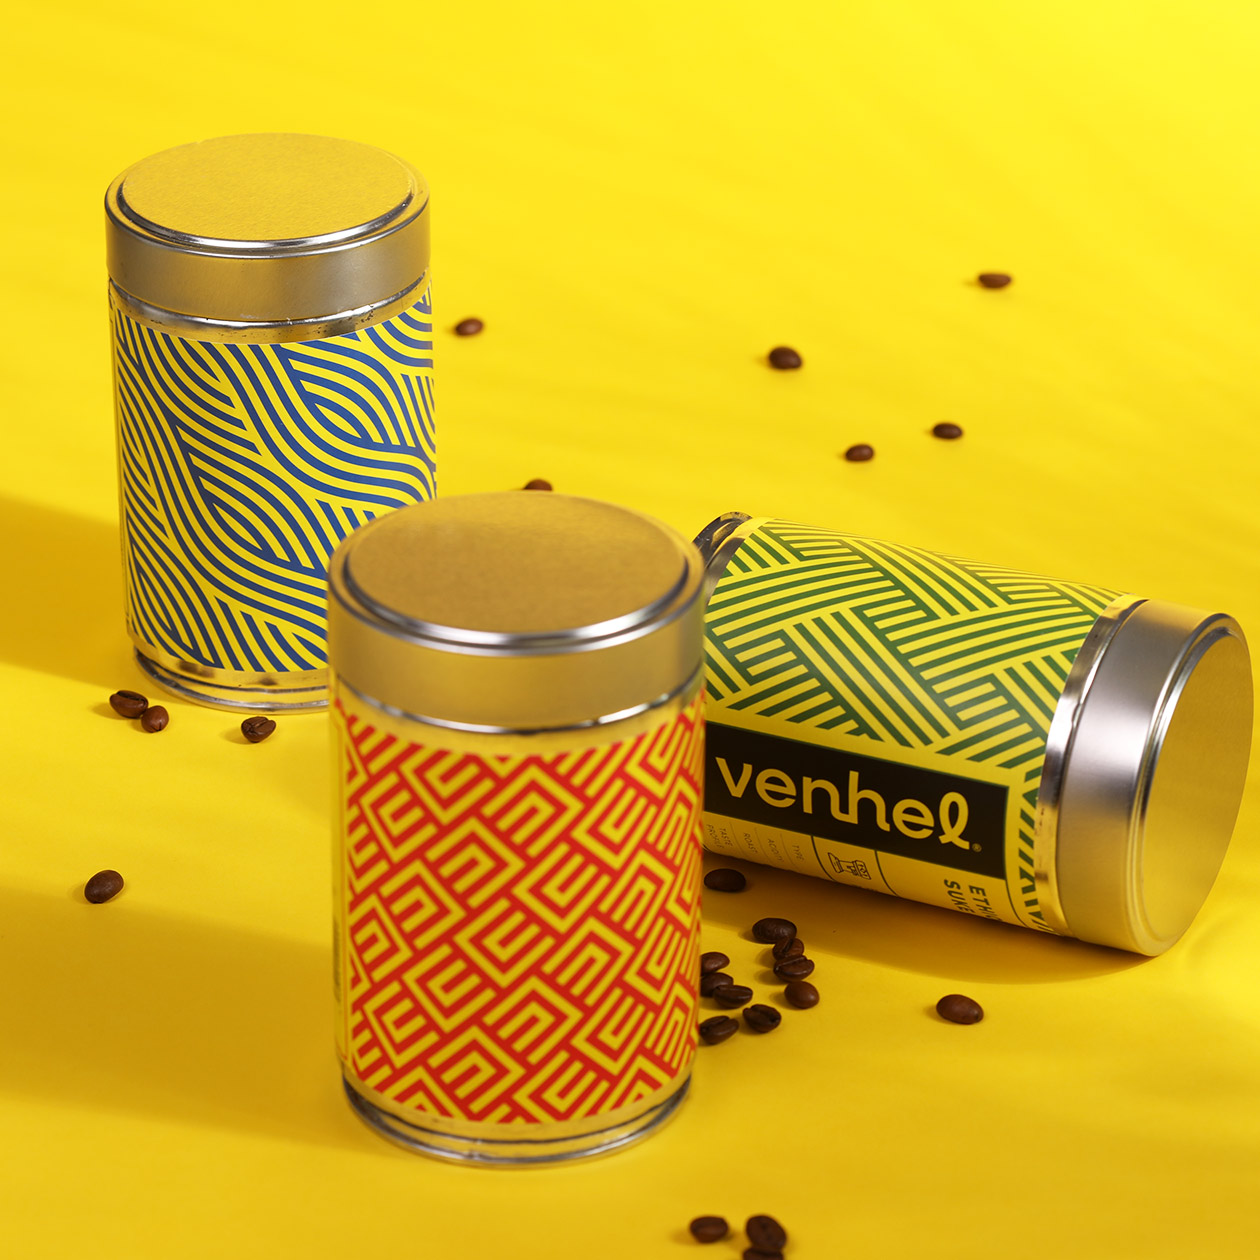 packaging venhel coffee yellow can